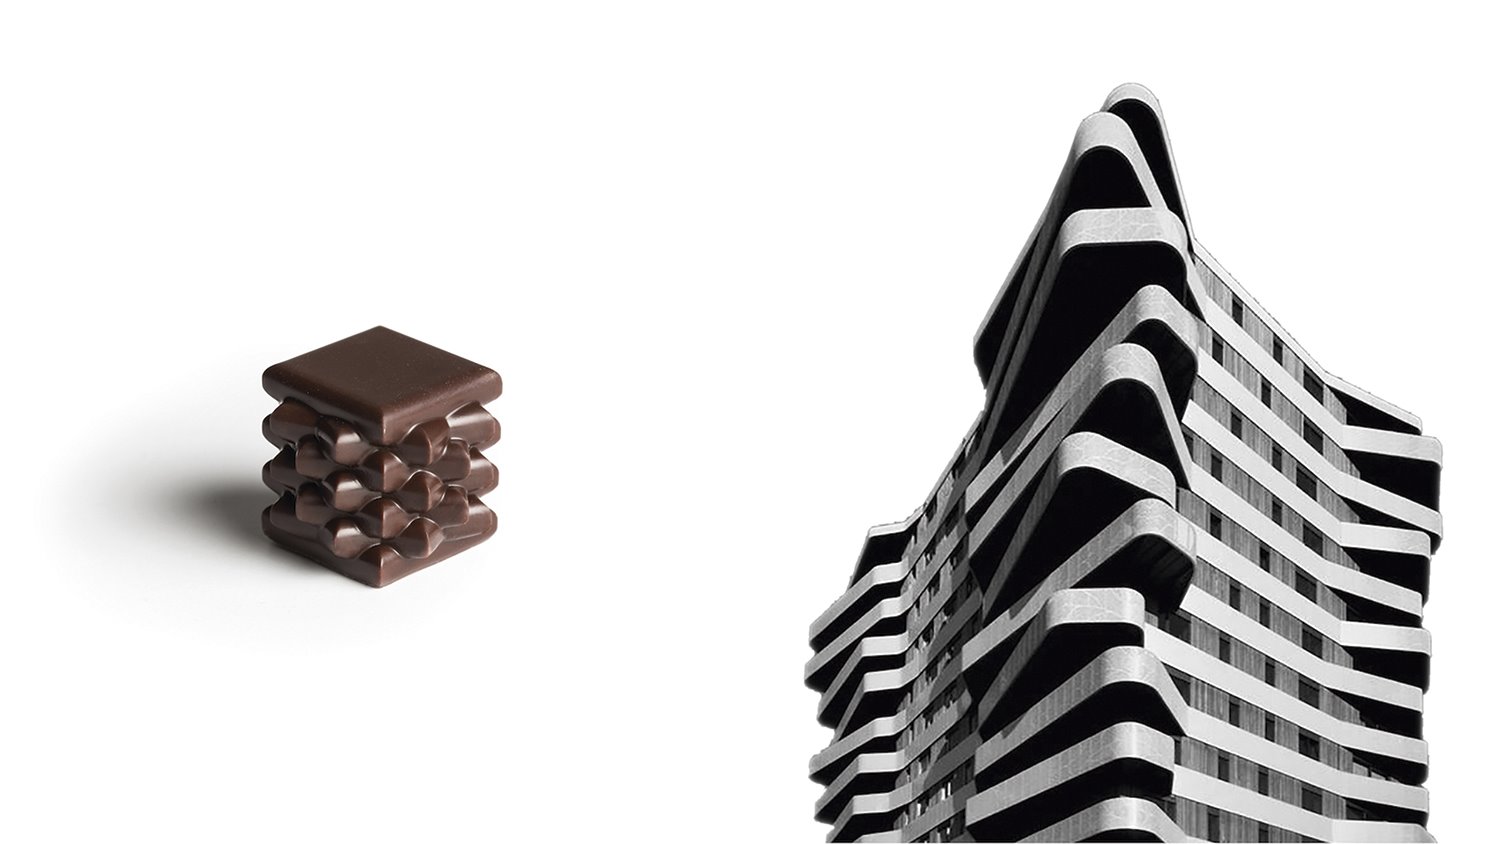 Ryan-L-Foote-chocolate-y-arquitectura